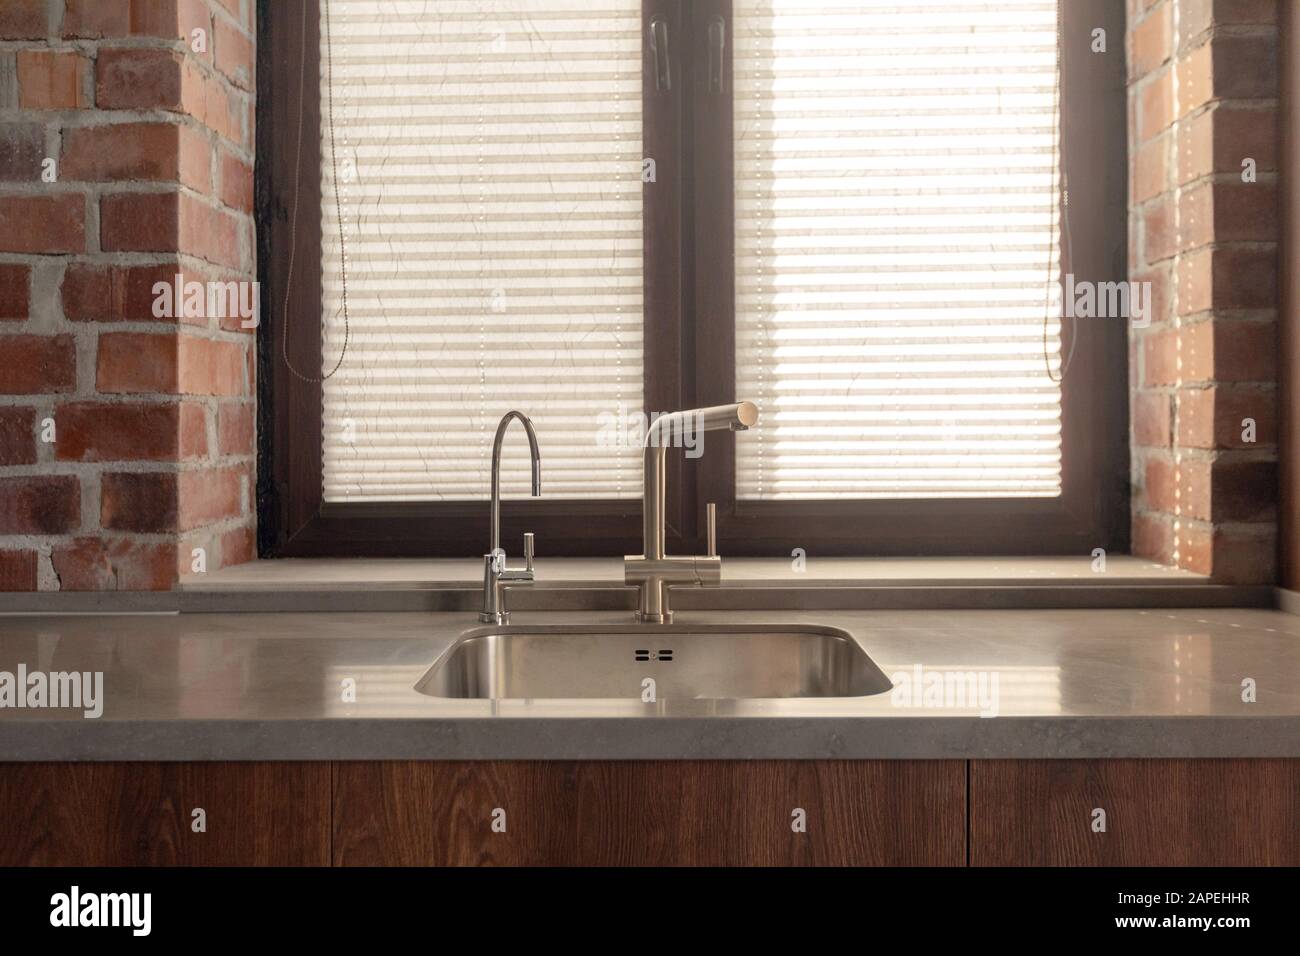 Kitchen sink with few faucets next to window and brick wall Stock Photo